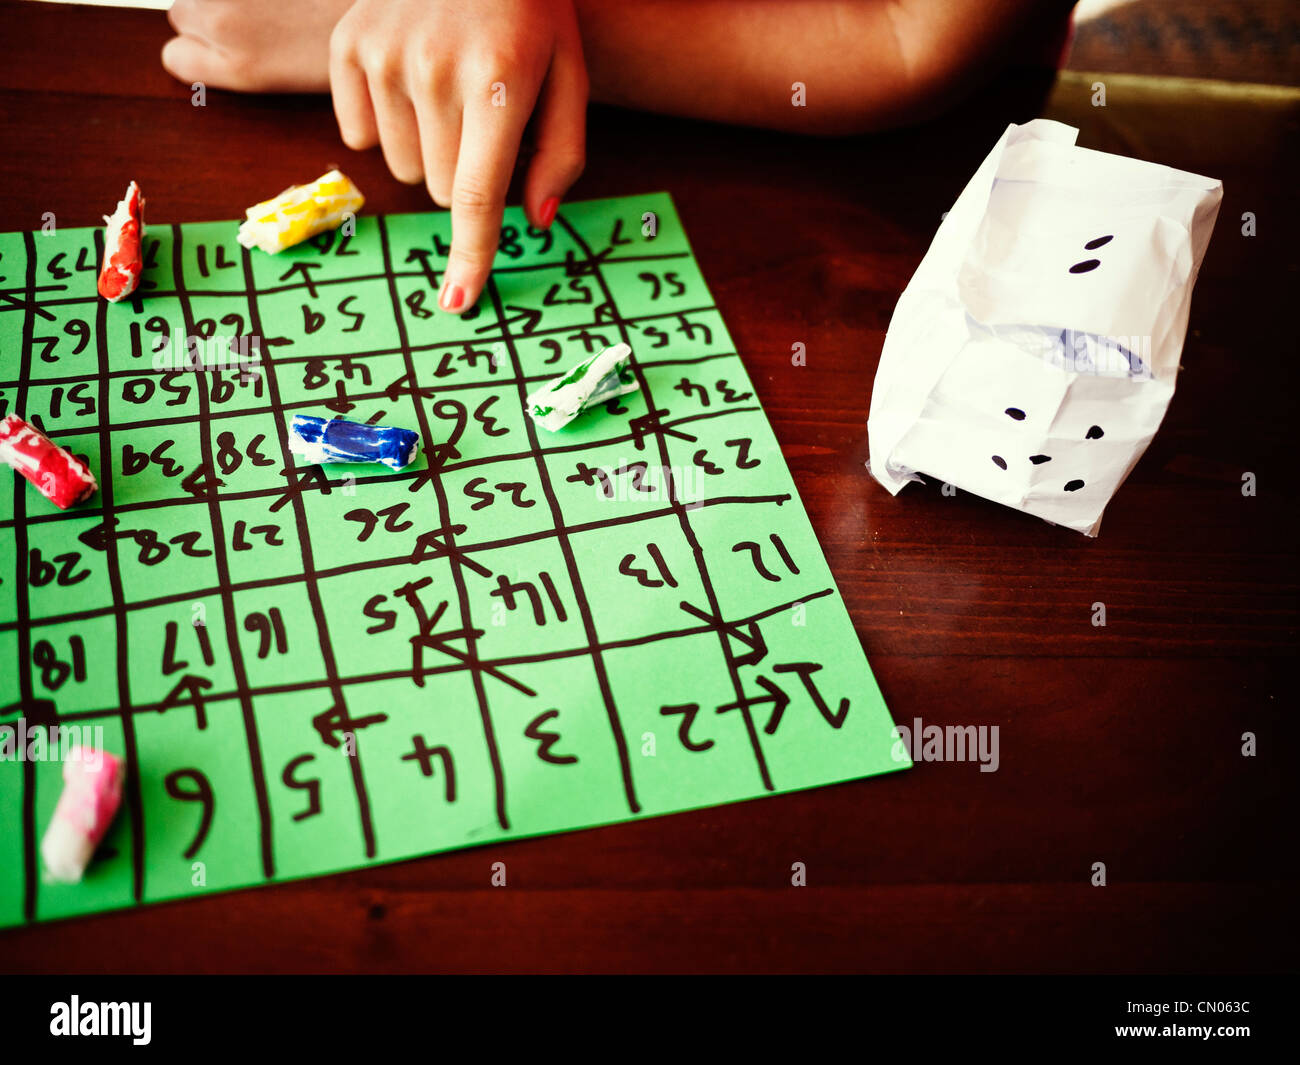 Girl plays her homemade board game with homemade counters and dice. Stock Photo